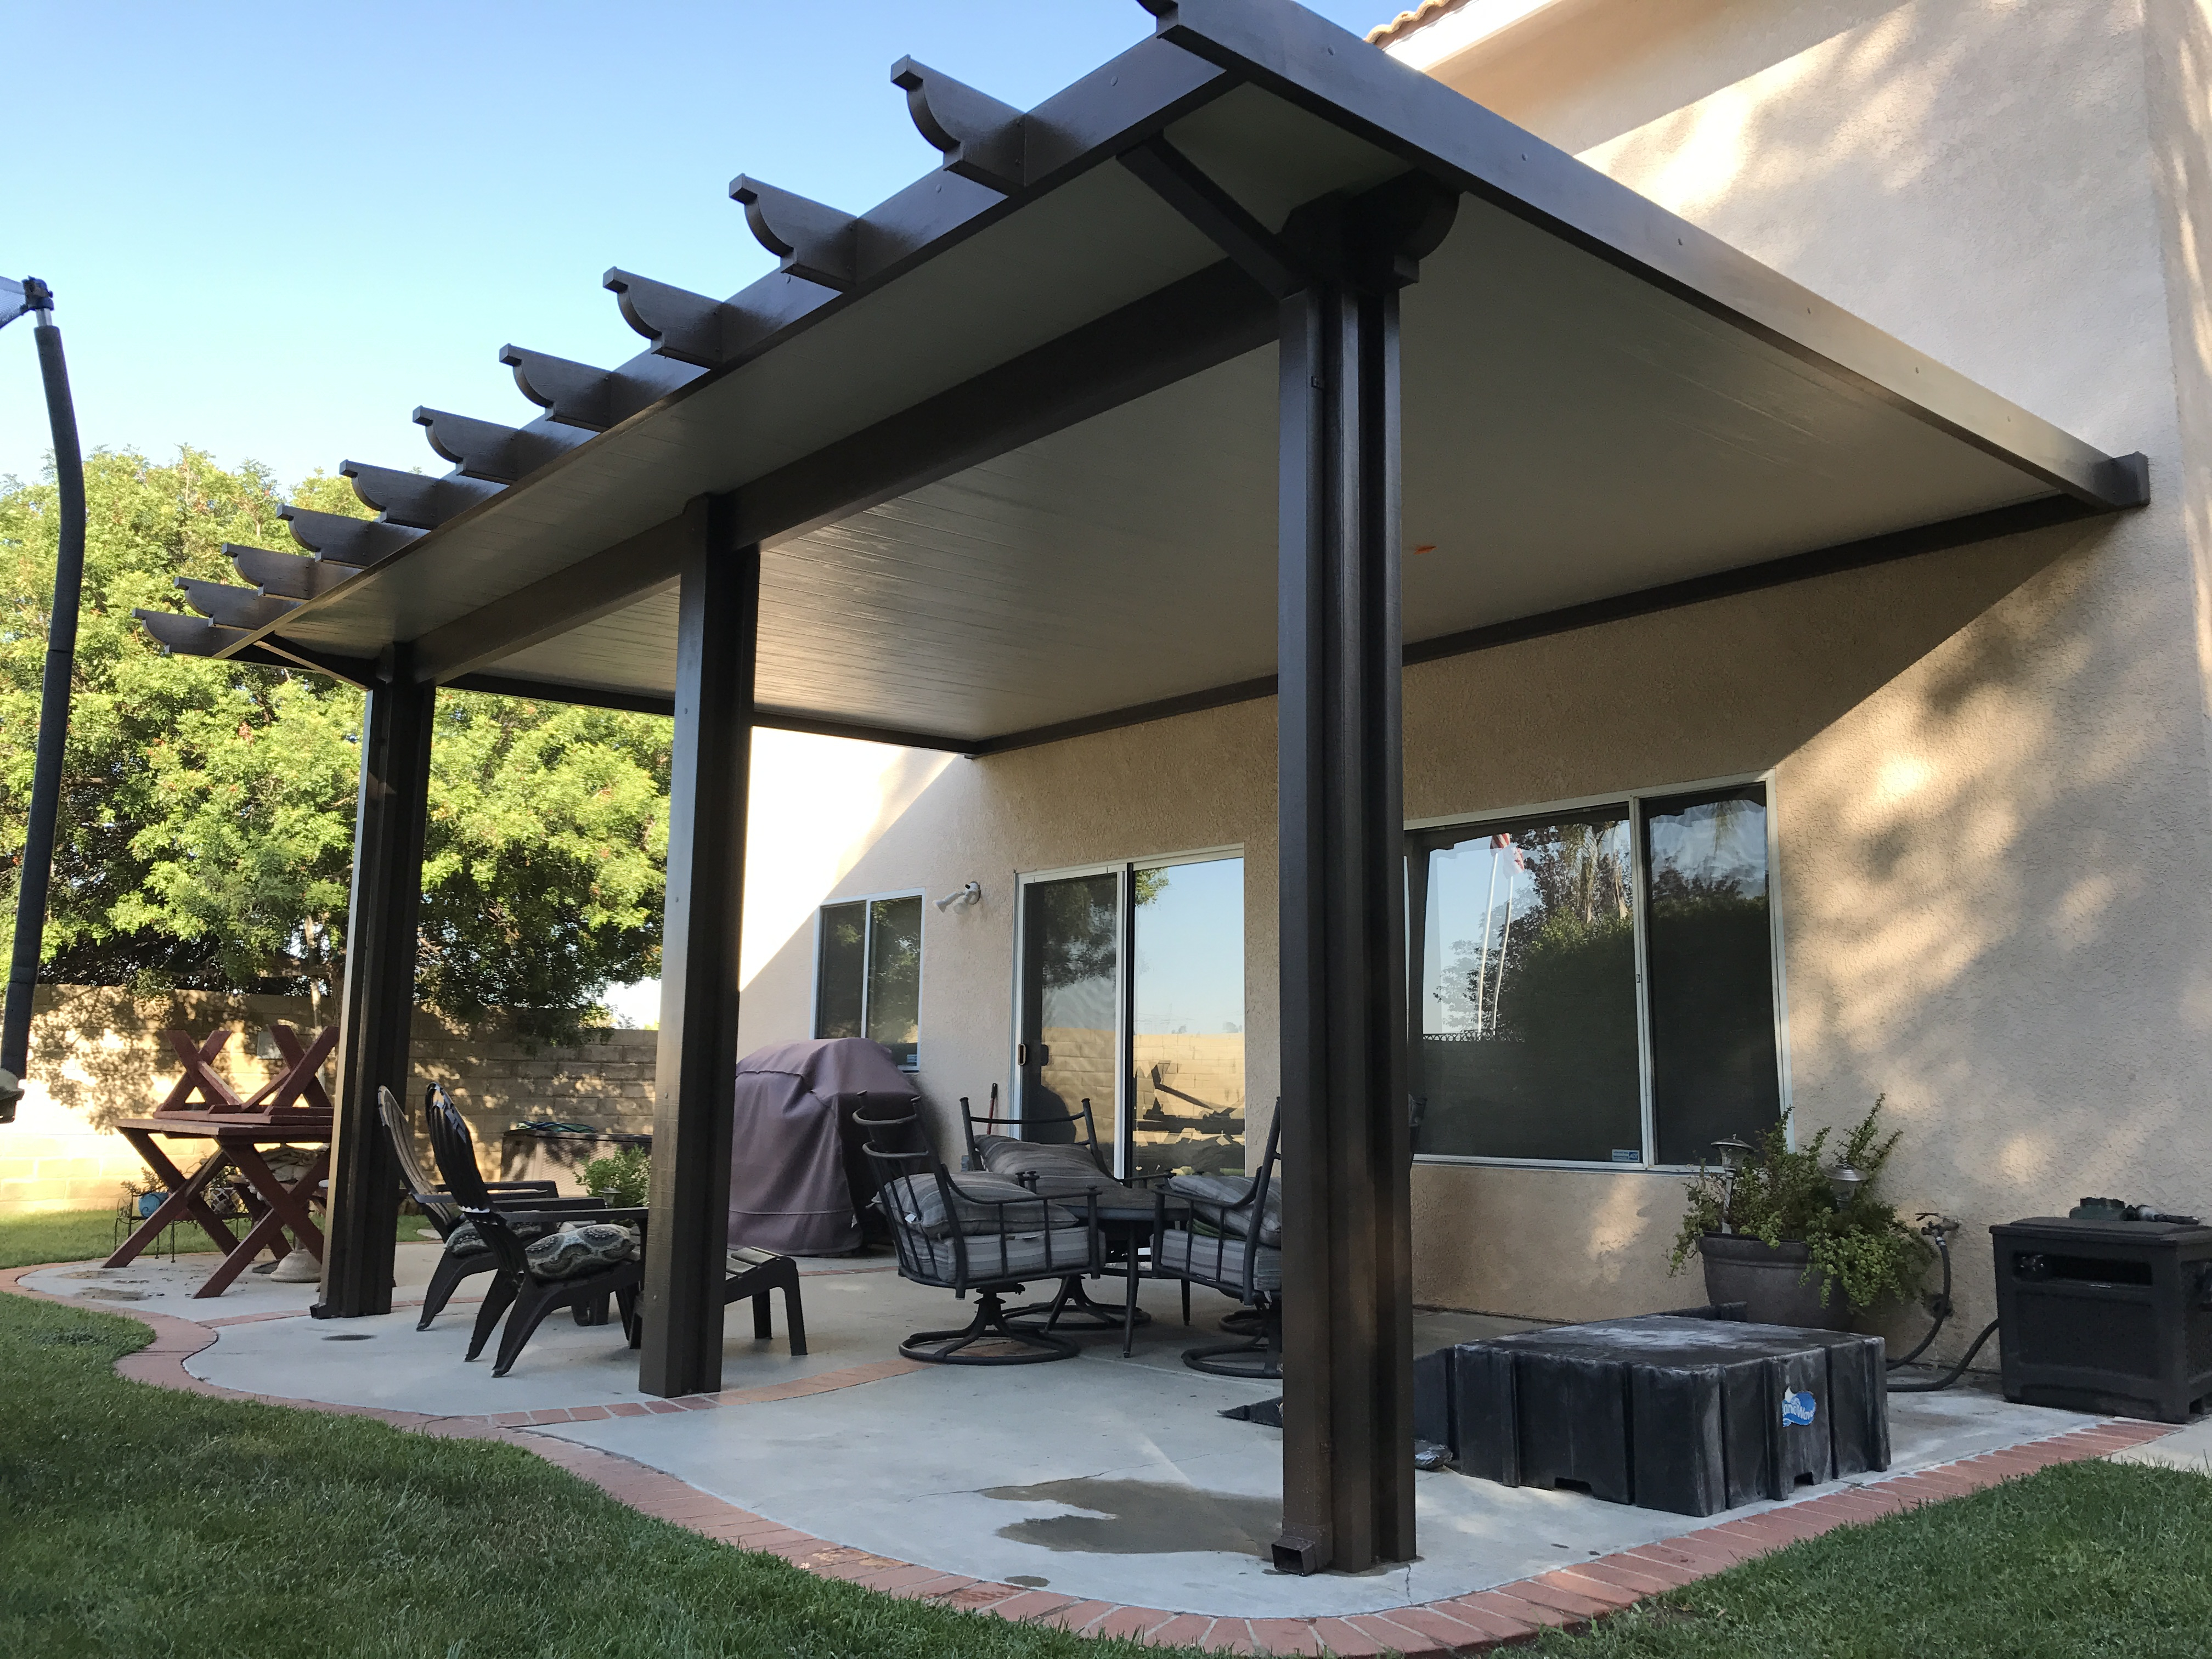 Alumawood Insulated Roofed Patio Cover Patiocovered with regard to dimensions 4032 X 3024